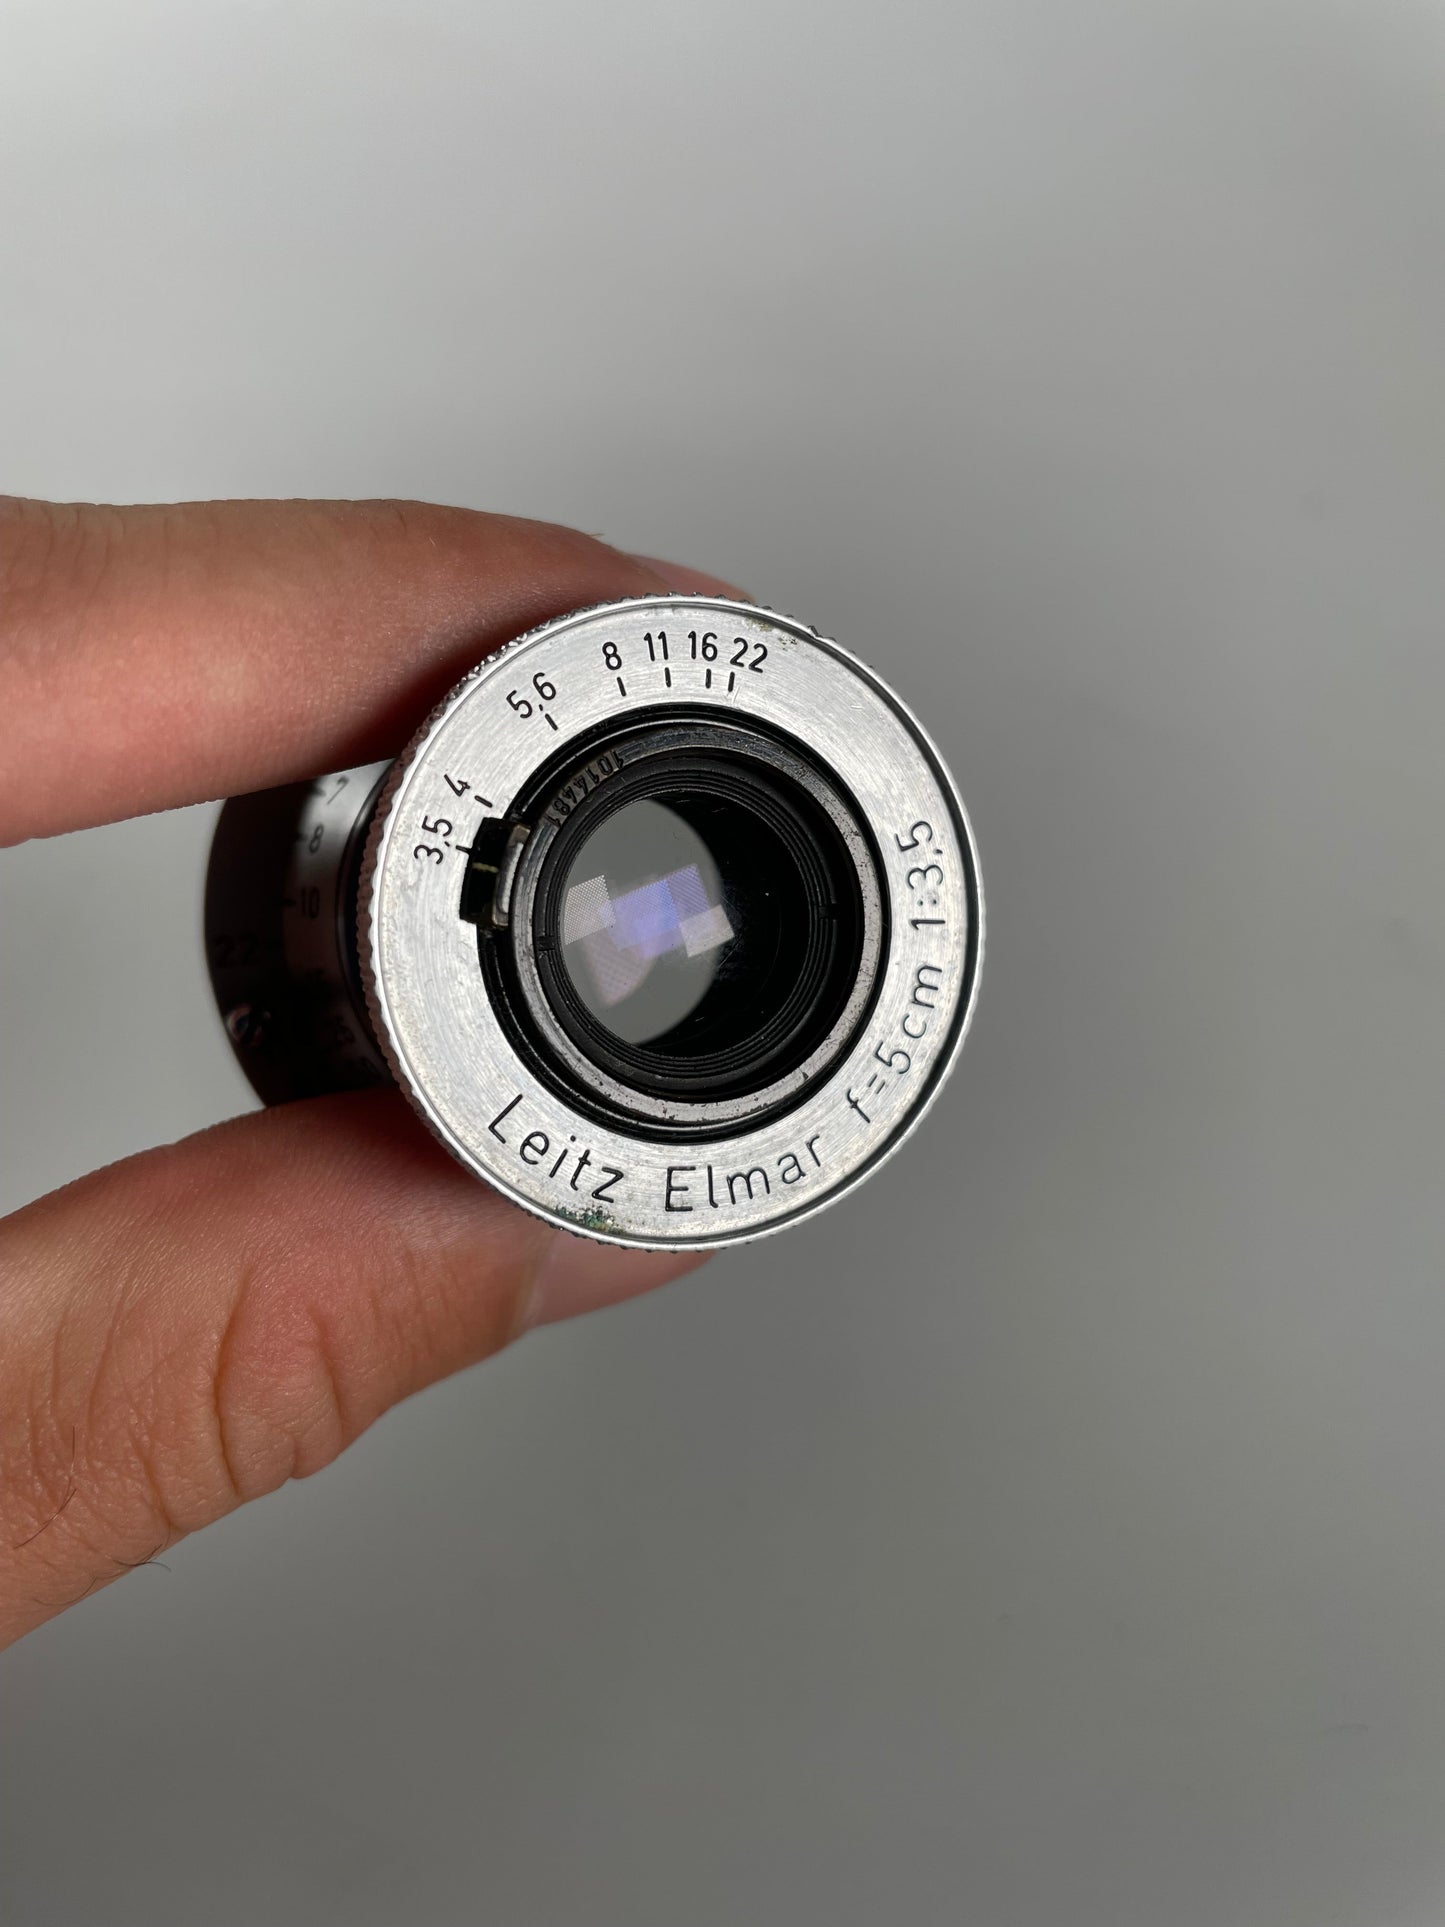 Leica Leitz 50mm (5cm) f3.5 Elmar M39 Collapsible Lens red scale